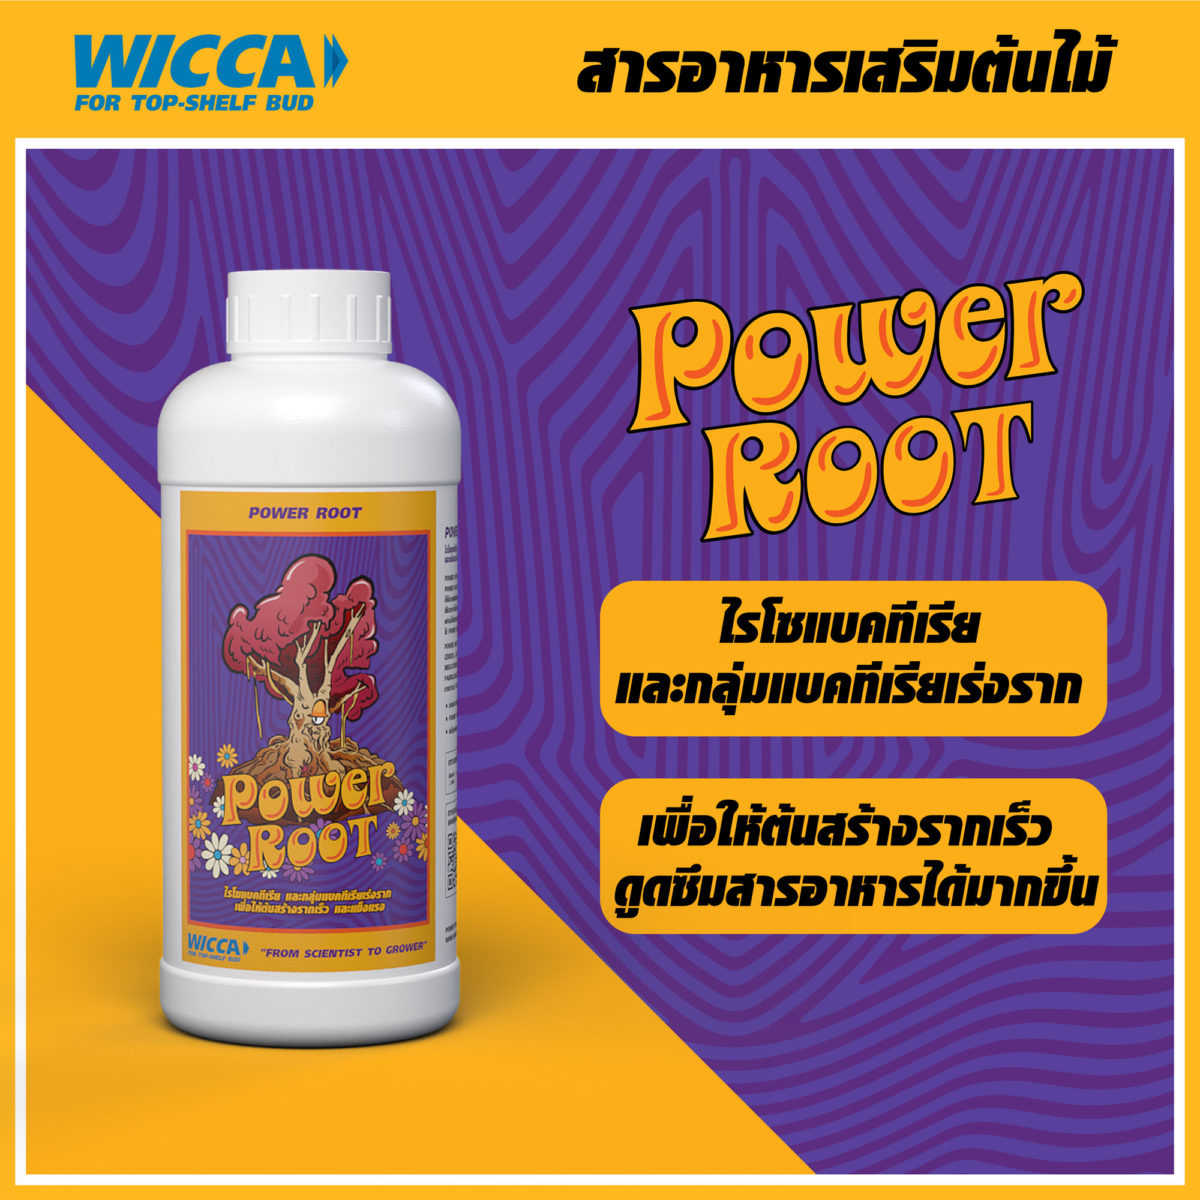 WICCA ADS COVER POWER ROOT